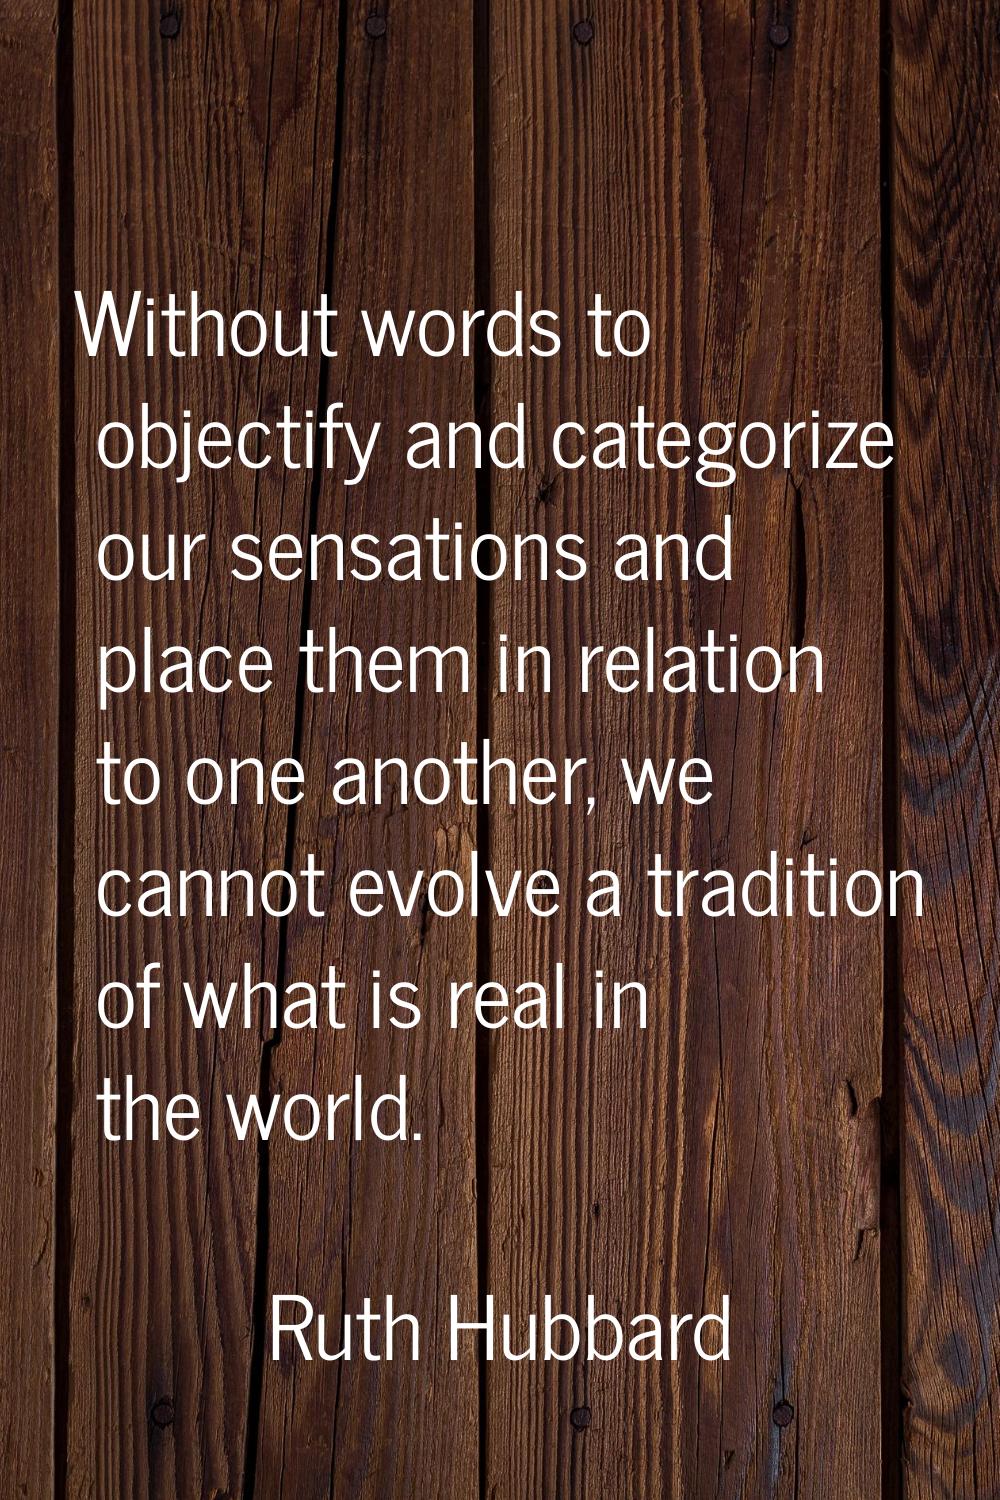 Without words to objectify and categorize our sensations and place them in relation to one another,